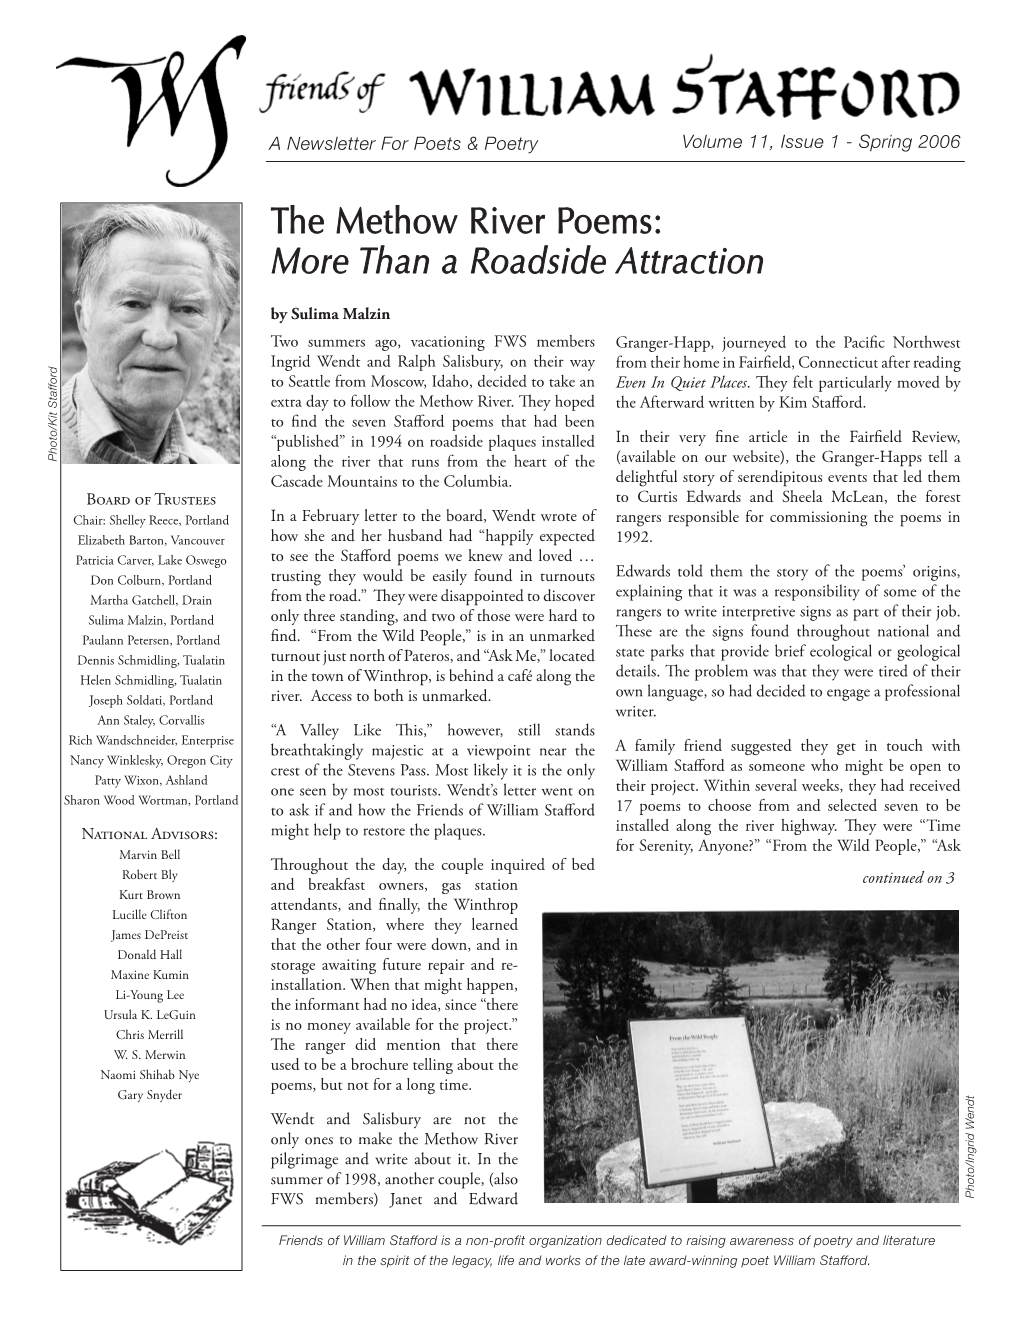 The Methow River Poems: More Than a Roadside Attraction